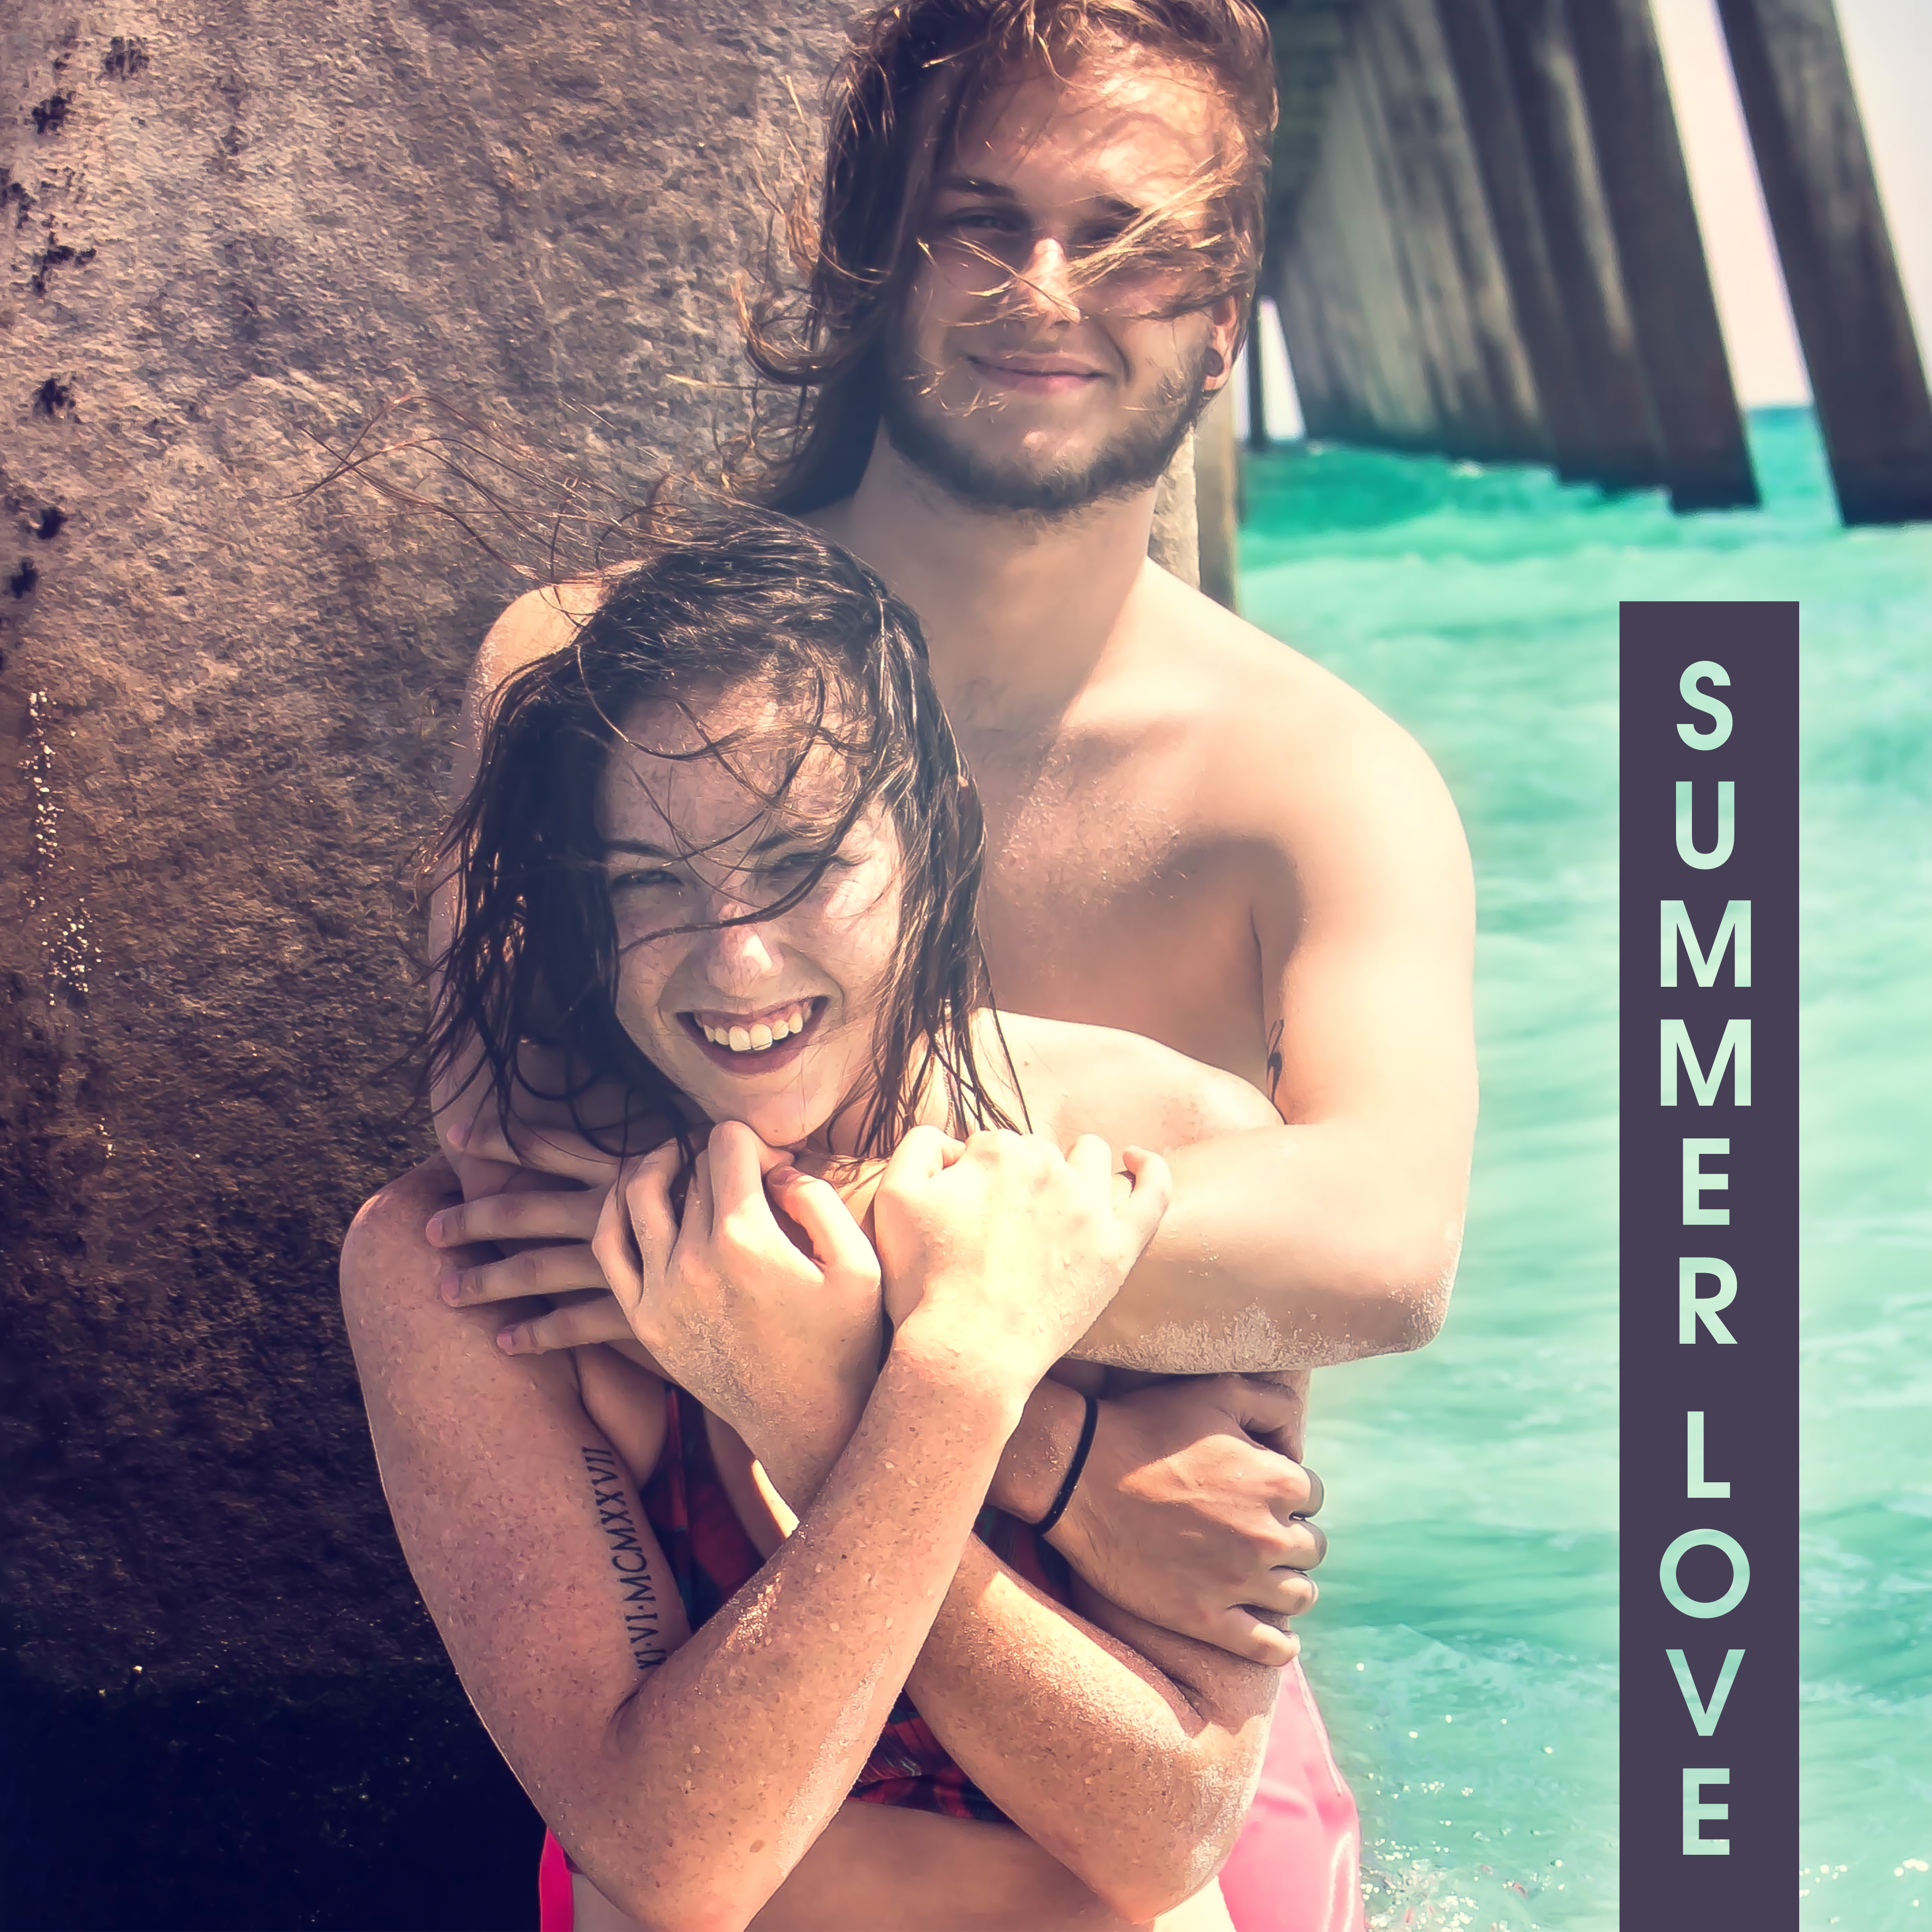 Summer Love – Relaxation Sounds for Two, **** Chillout, Good Energy, Sensual Dance, Deep Massage, Best Chill for Lovers, Summertime